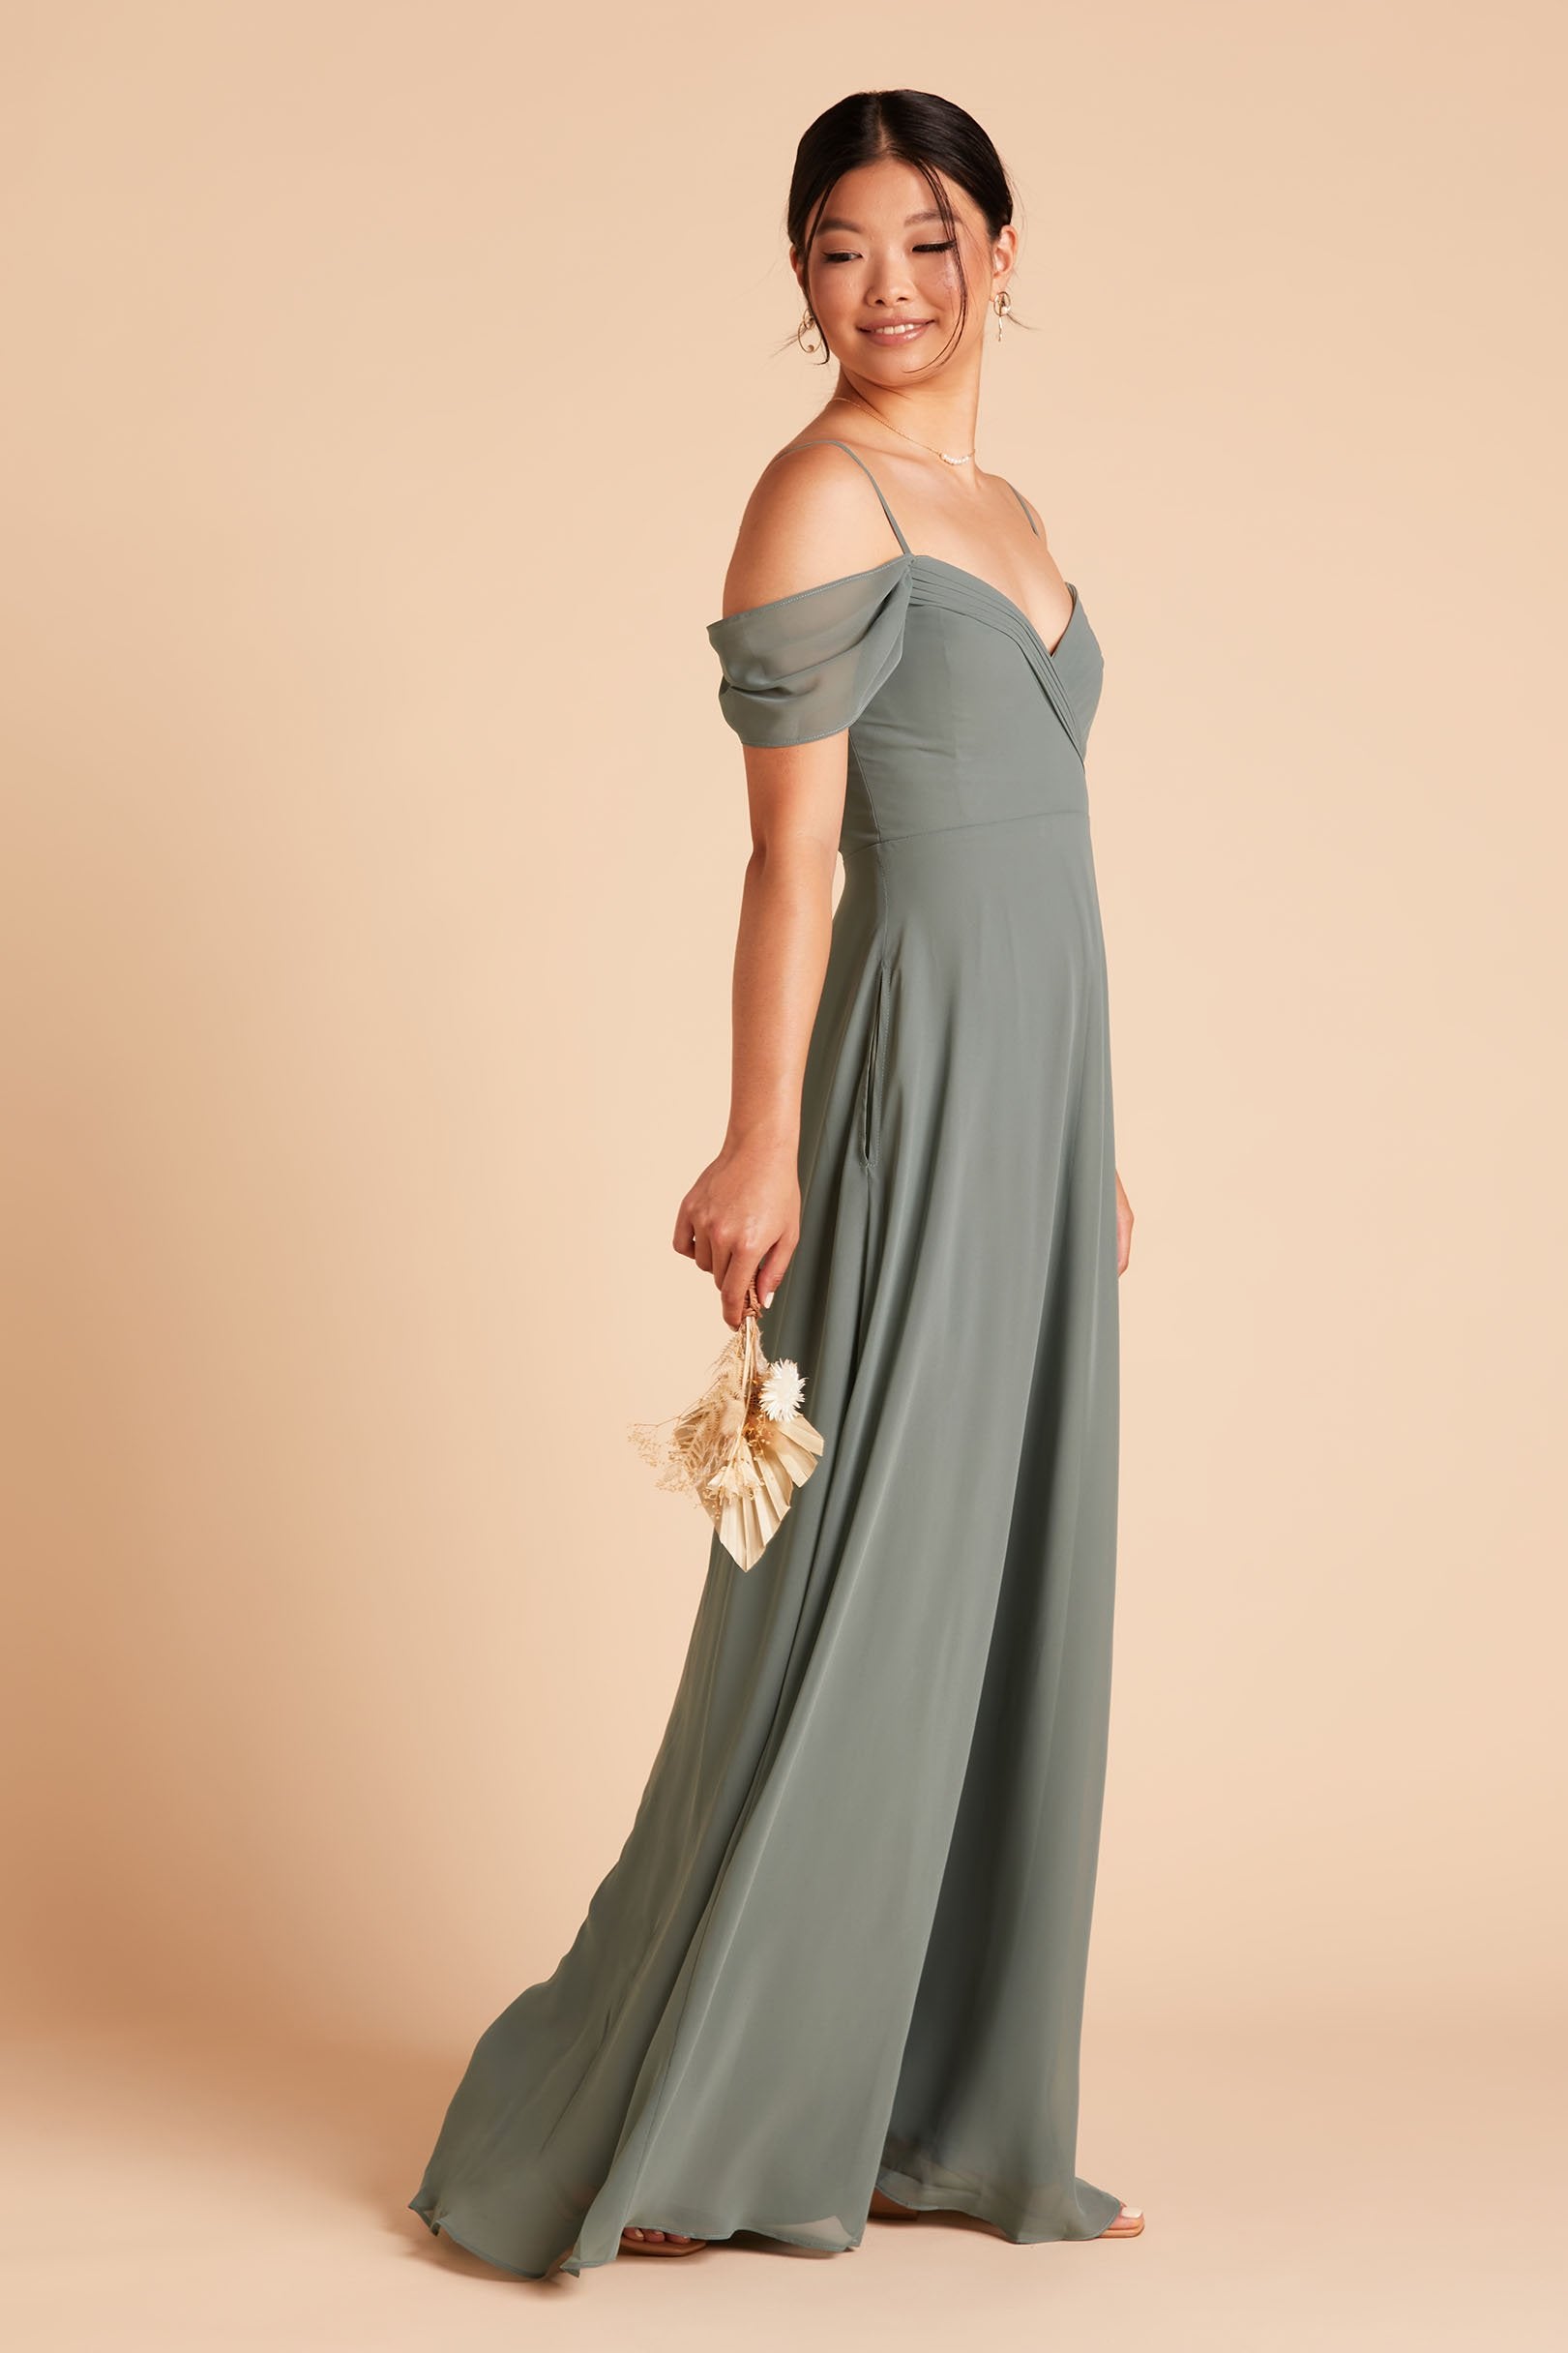 Spence convertible bridesmaid dress in sea glass green chiffon by Birdy Grey, side view